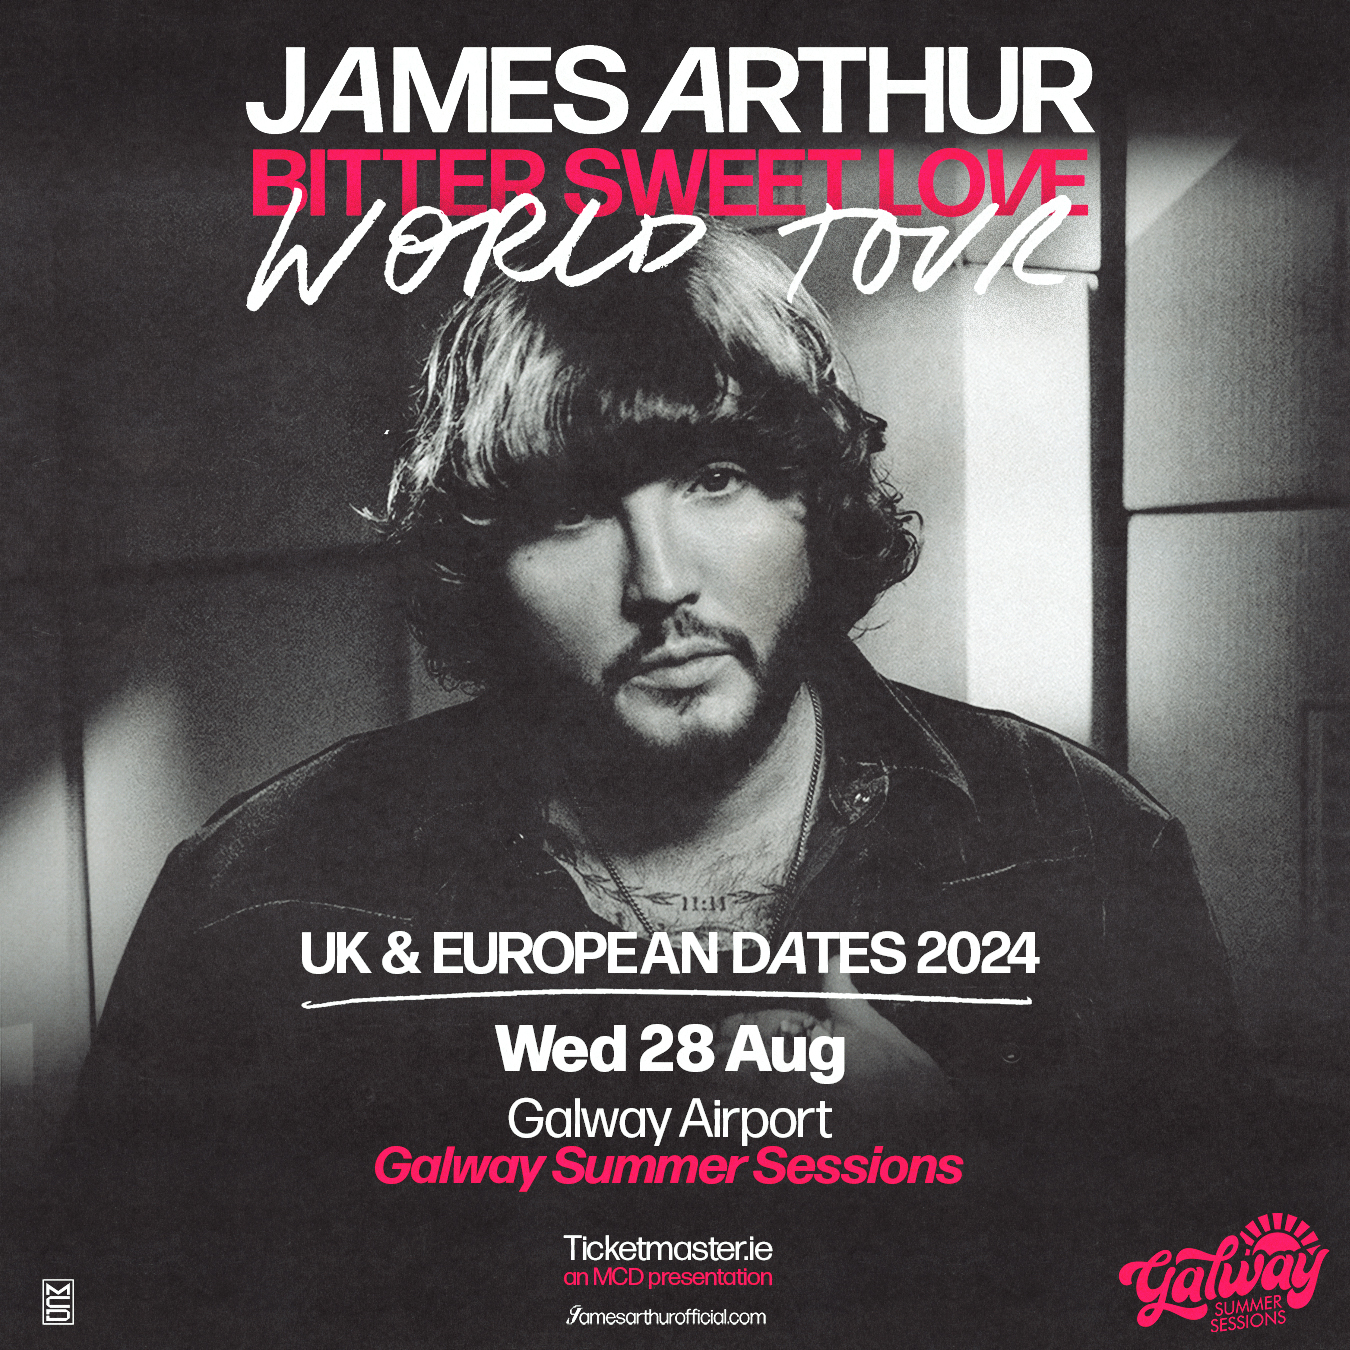 James Arthur Galway Summer Sessions, Galway Airport 28th August 2024